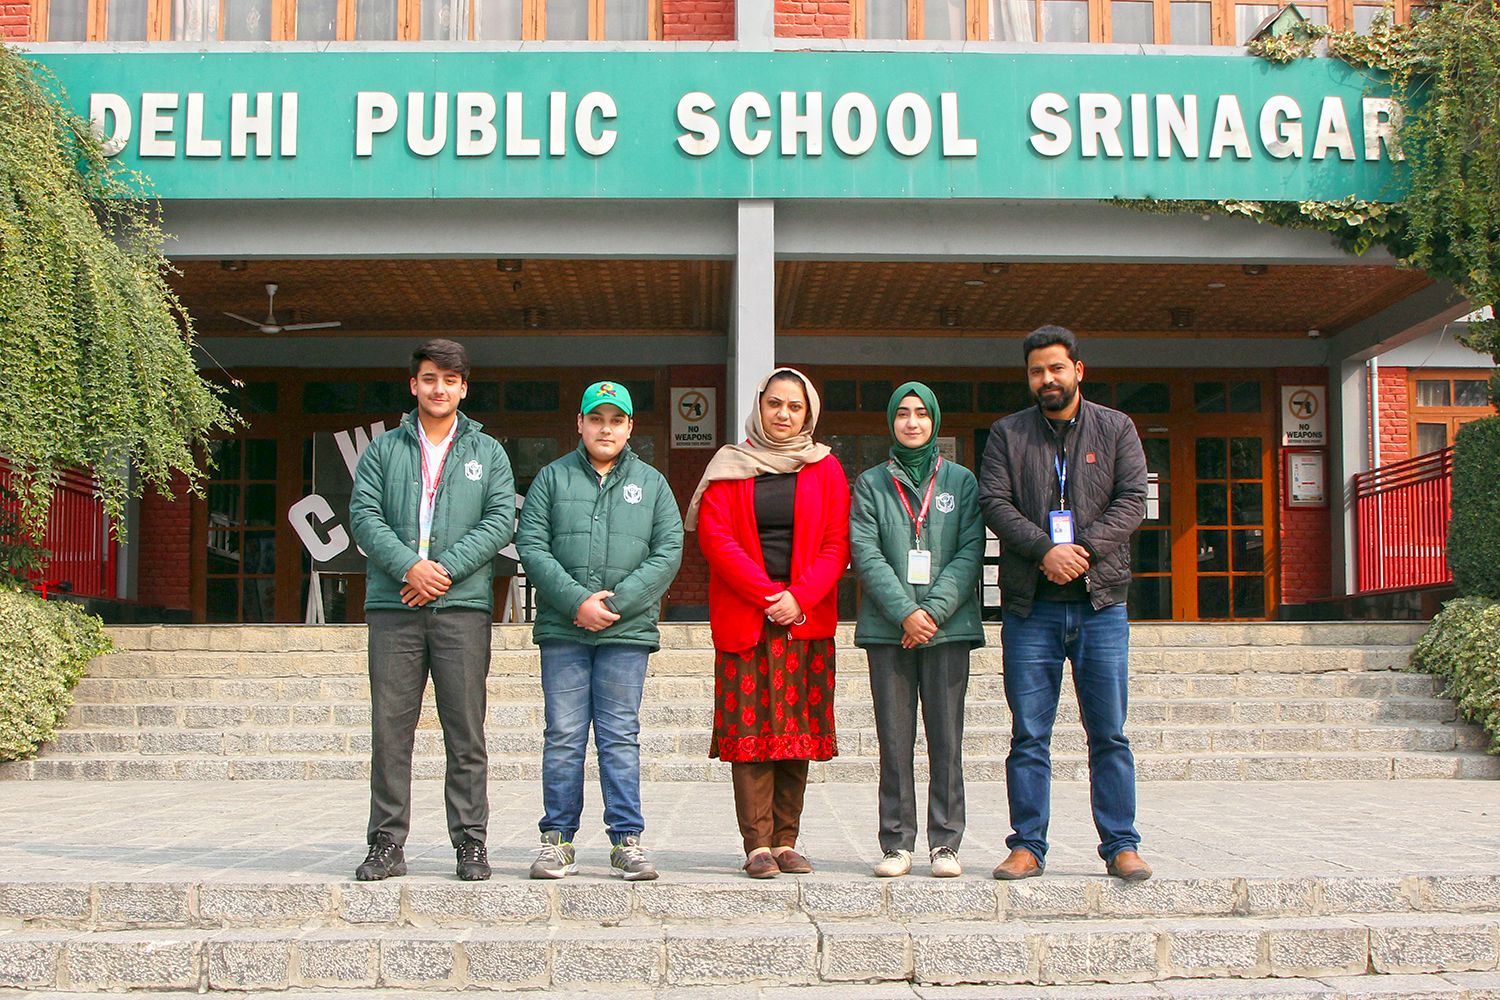 DPS Srinagar bags 2nd position in Reel to Real National Film making Competition, 2021